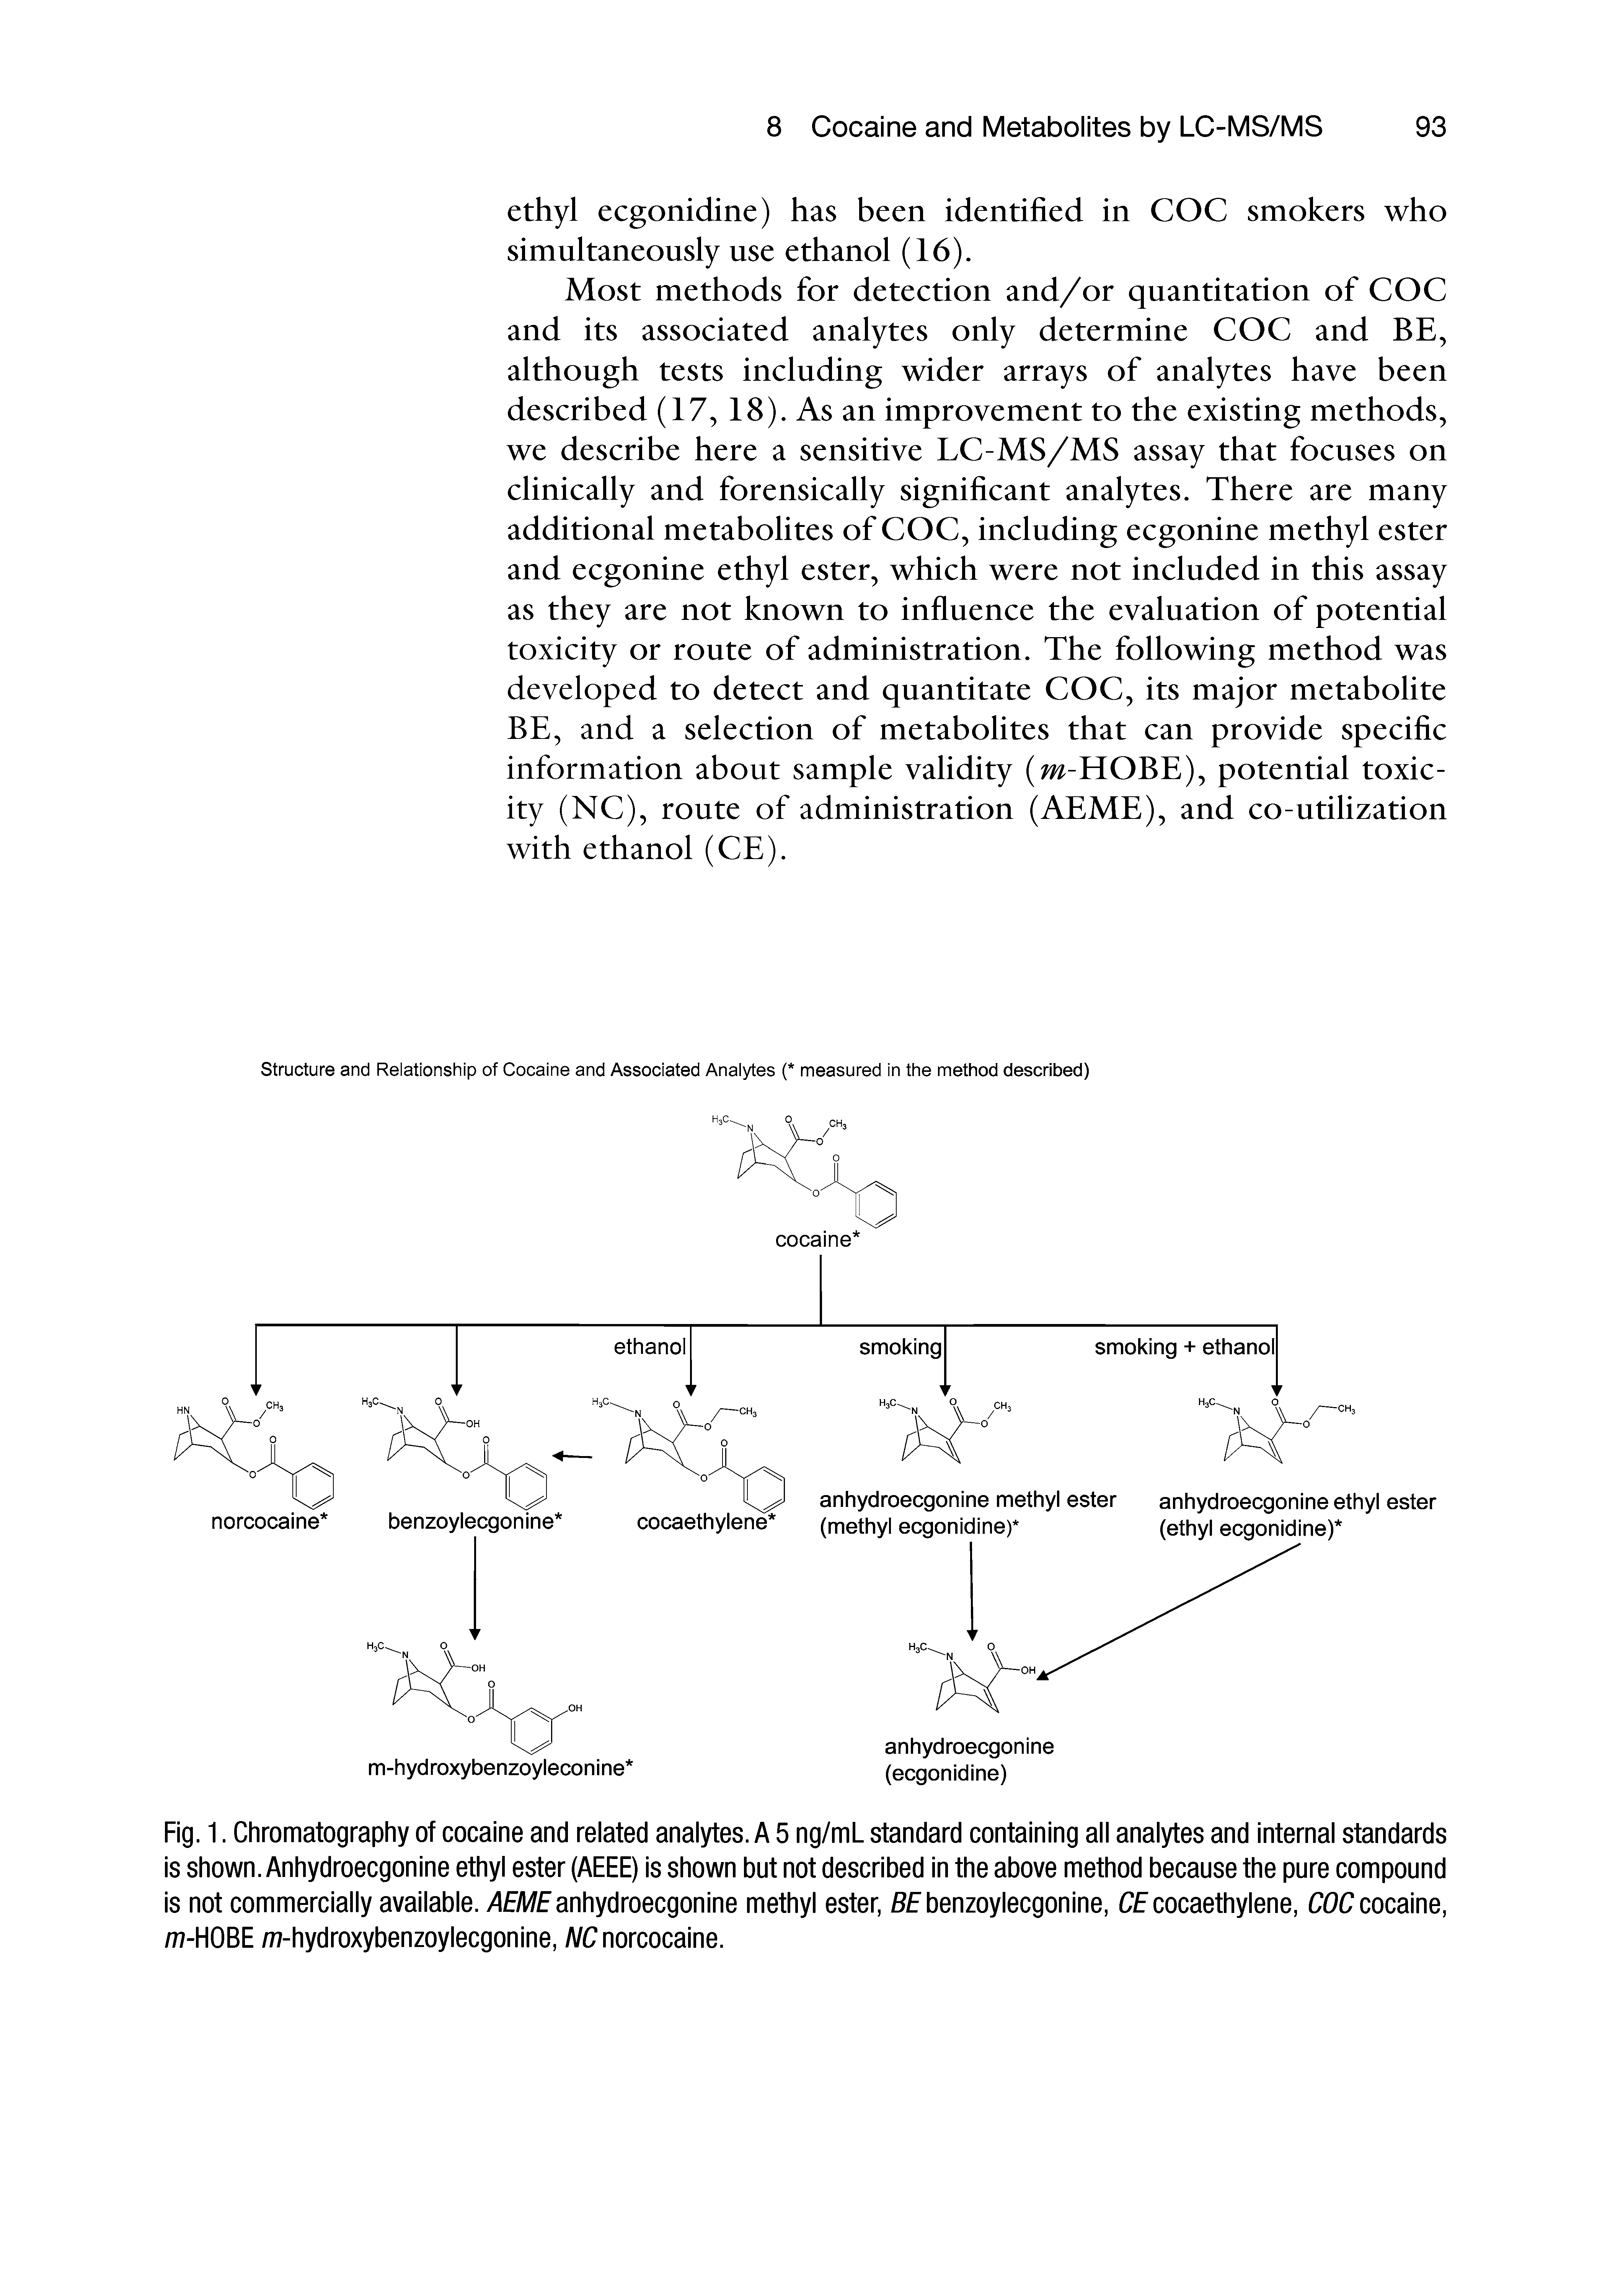 Fig. 1. Chromatography of cocaine and related analytes. A 5 ng/mL standard containing all analytes and internal standards is shown. Anhydroecgonine ethyl ester (AEEE) is shown but not described in the above method because the pure compound is not commercially available. AEME anhydroecgonine methyl ester, 8E benzoylecgonine, CE cocaethylene, COC cocaine, /77-HOBE /77-hydroxybenzoylecgonine, /VC norcocaine.